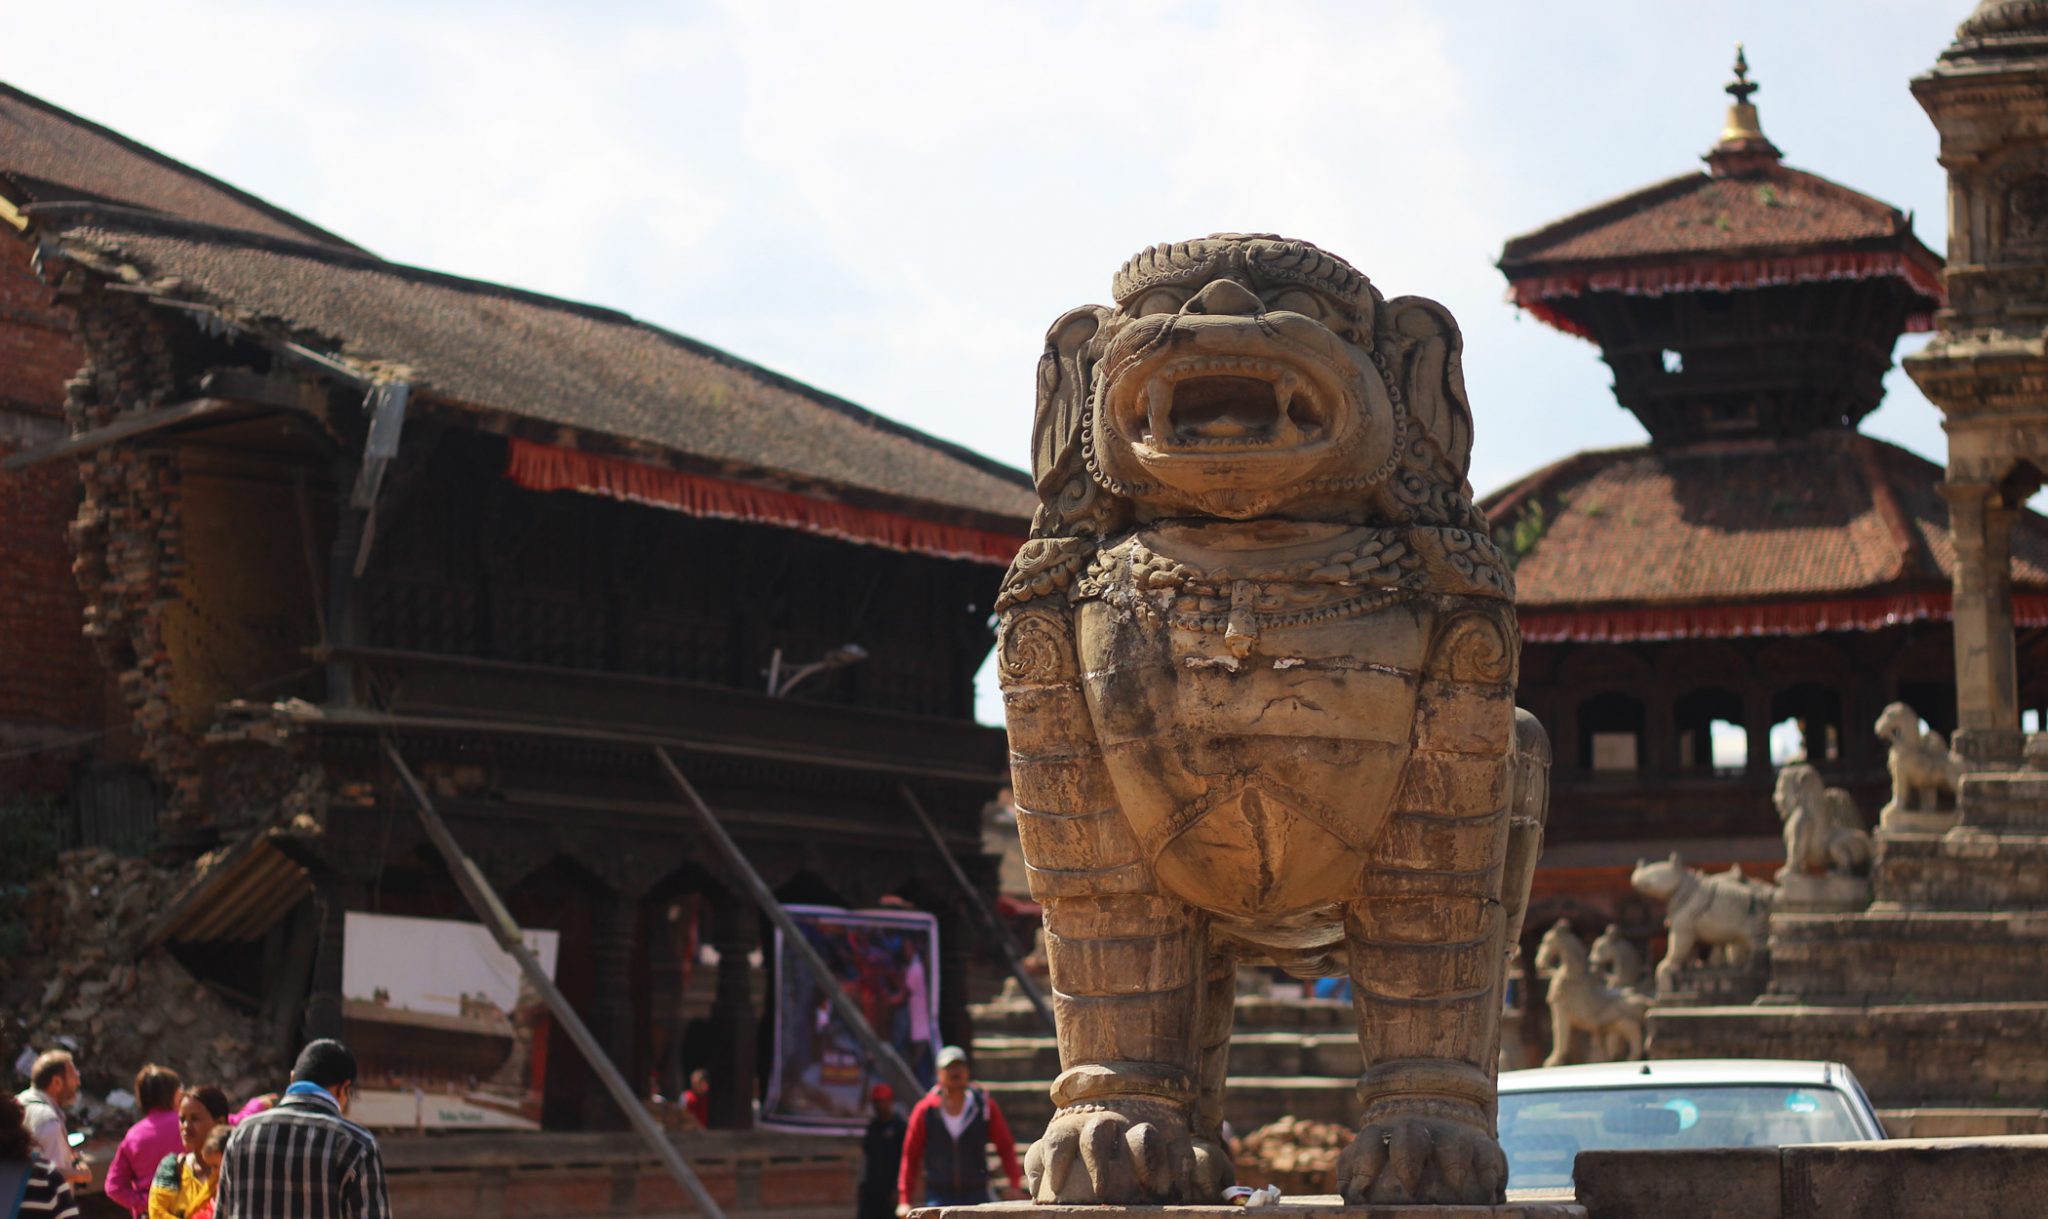 A set of two stone lions stand on their own in Bhaktapur’s Durbar Square. It is thought that the temple they used to guard was destroyed by the 1934 earthquake, the worst in Nepal’s history. Nearly a third of the city’s temples and buildings were destroyed in that earthquake, which measured 8.0 in magnitude.